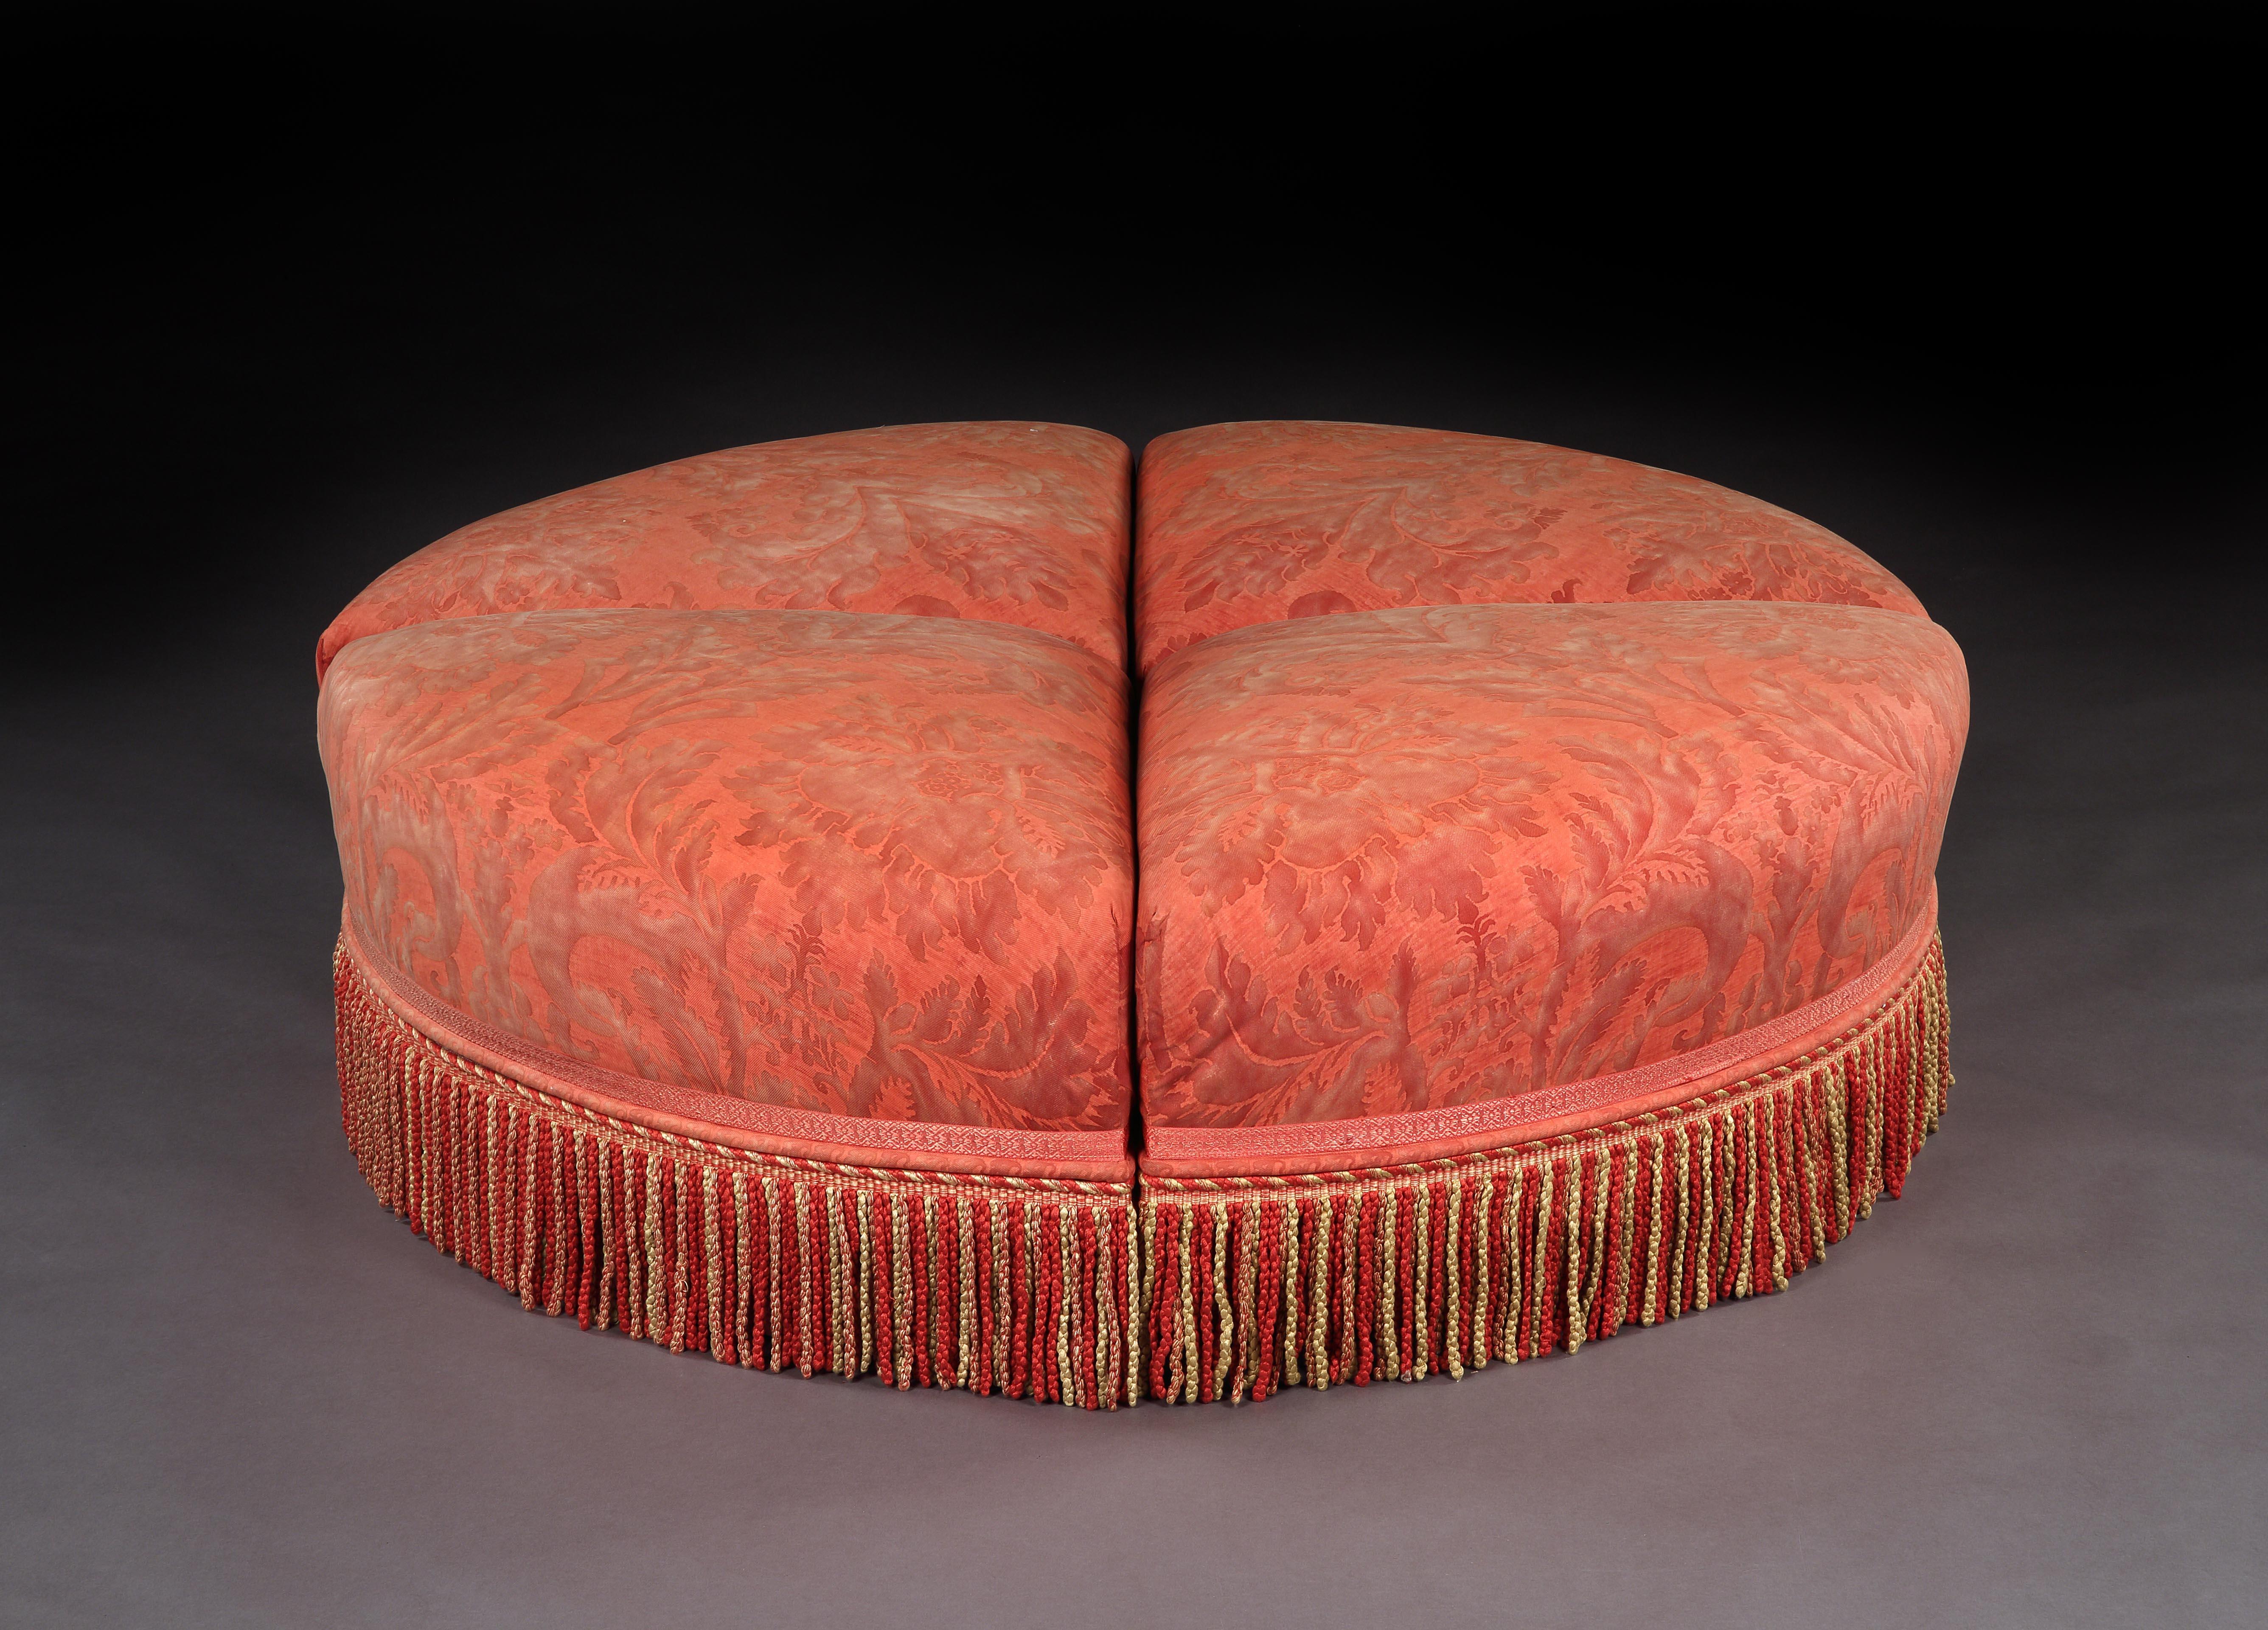 This beautiful, large, ottoman is extremely versatile as it comprises four individual sections which can be used as independent two-seat ottomans/pouffes/stools which fit together to form a large circular ottoman or pouffe or sofa table to support a